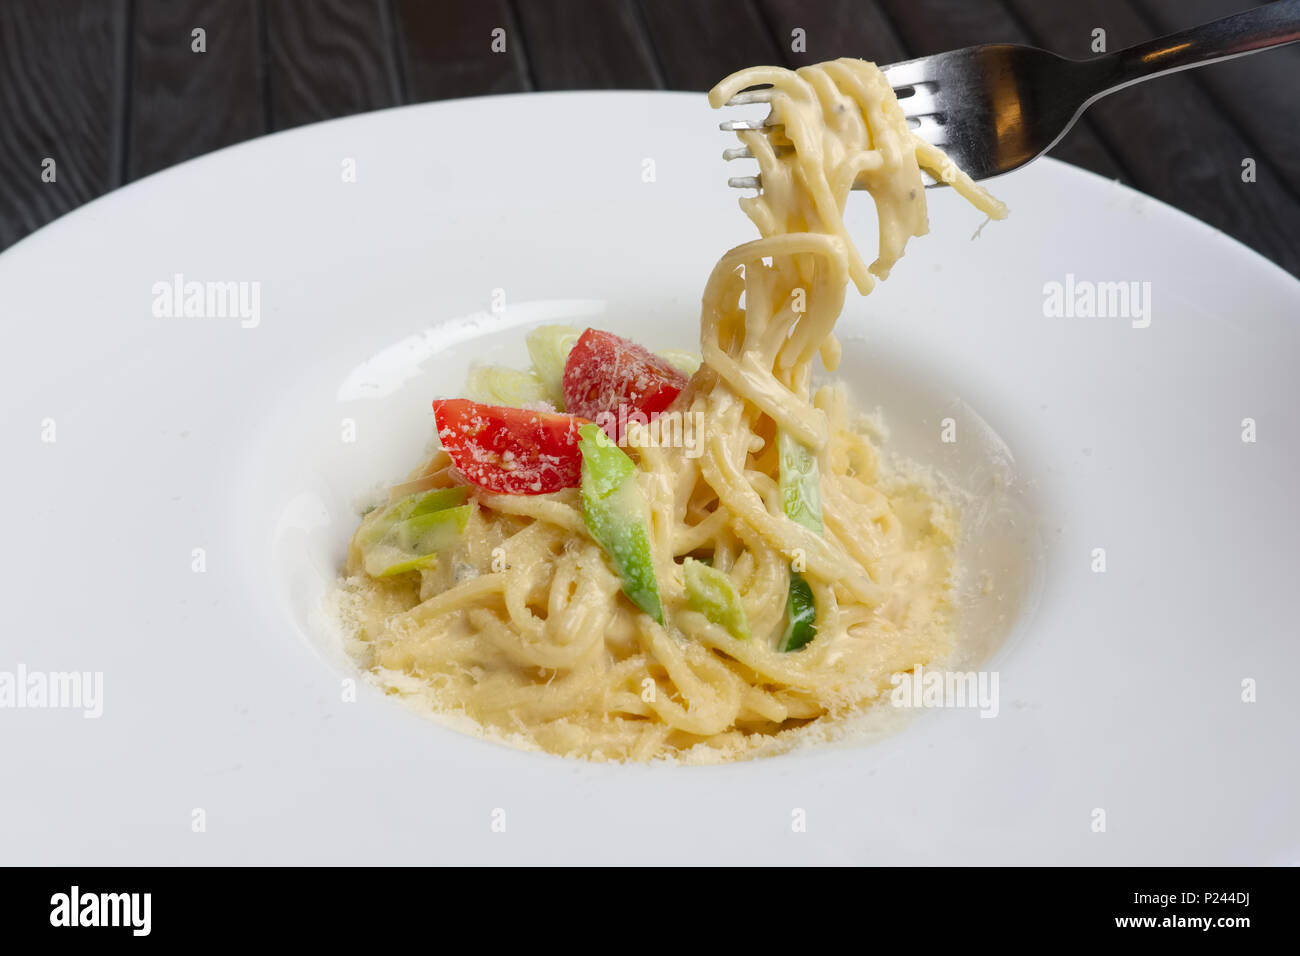 Plate with pasta served with bacon and ham, decorated with tomato cherry Stock Photo